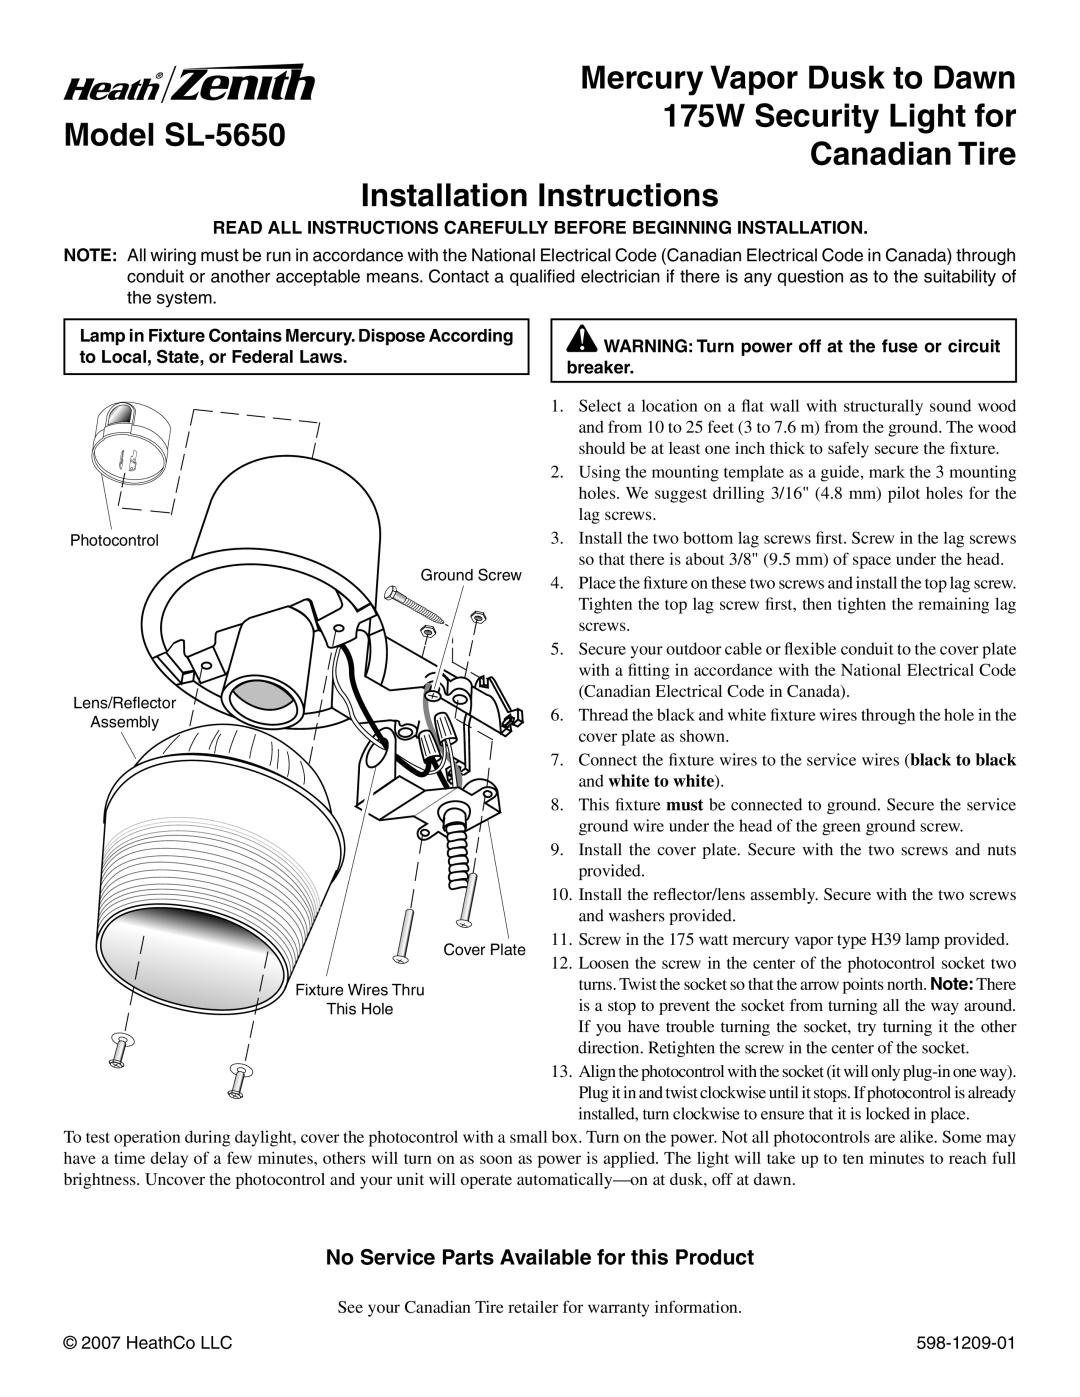 Heath Zenith installation instructions Model SL-5650, 175W Security Light for, Canadian Tire, Installation Instructions 